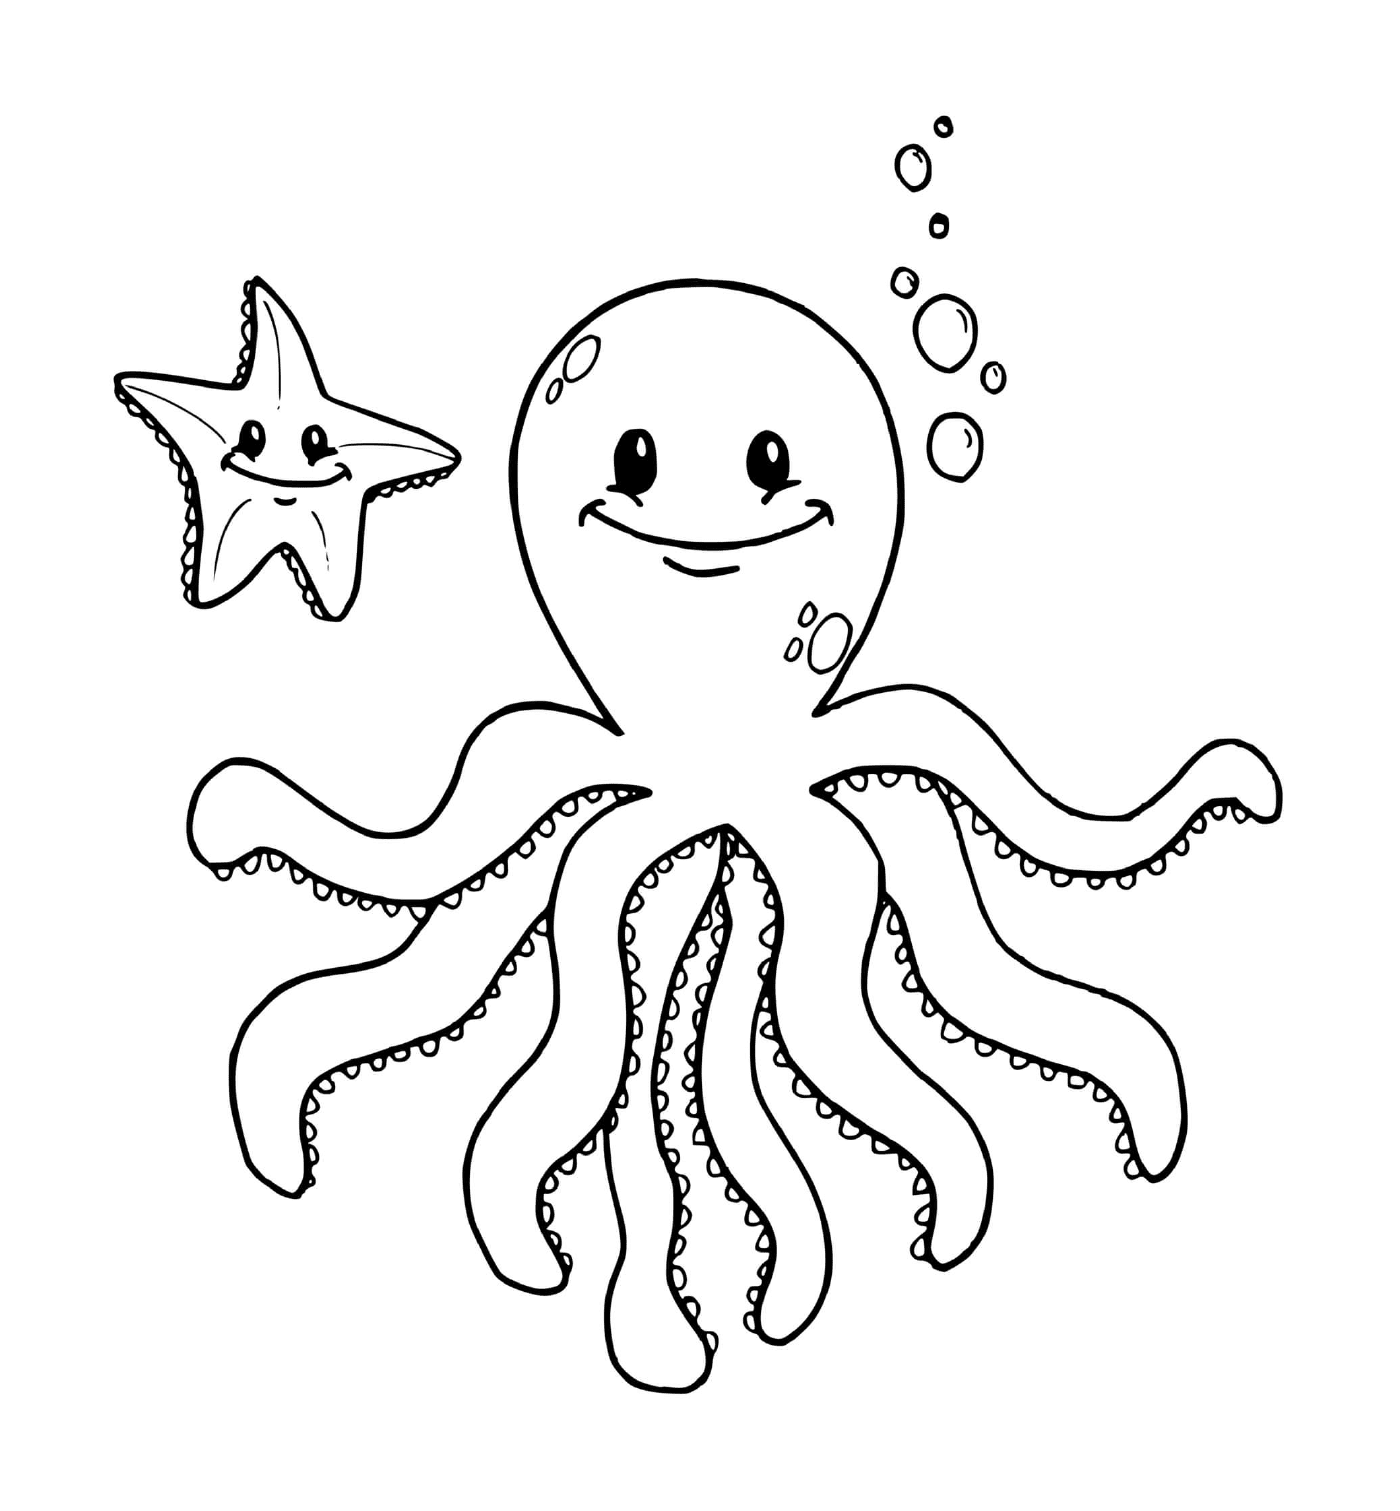  an octopus and a star of sea drawn together 